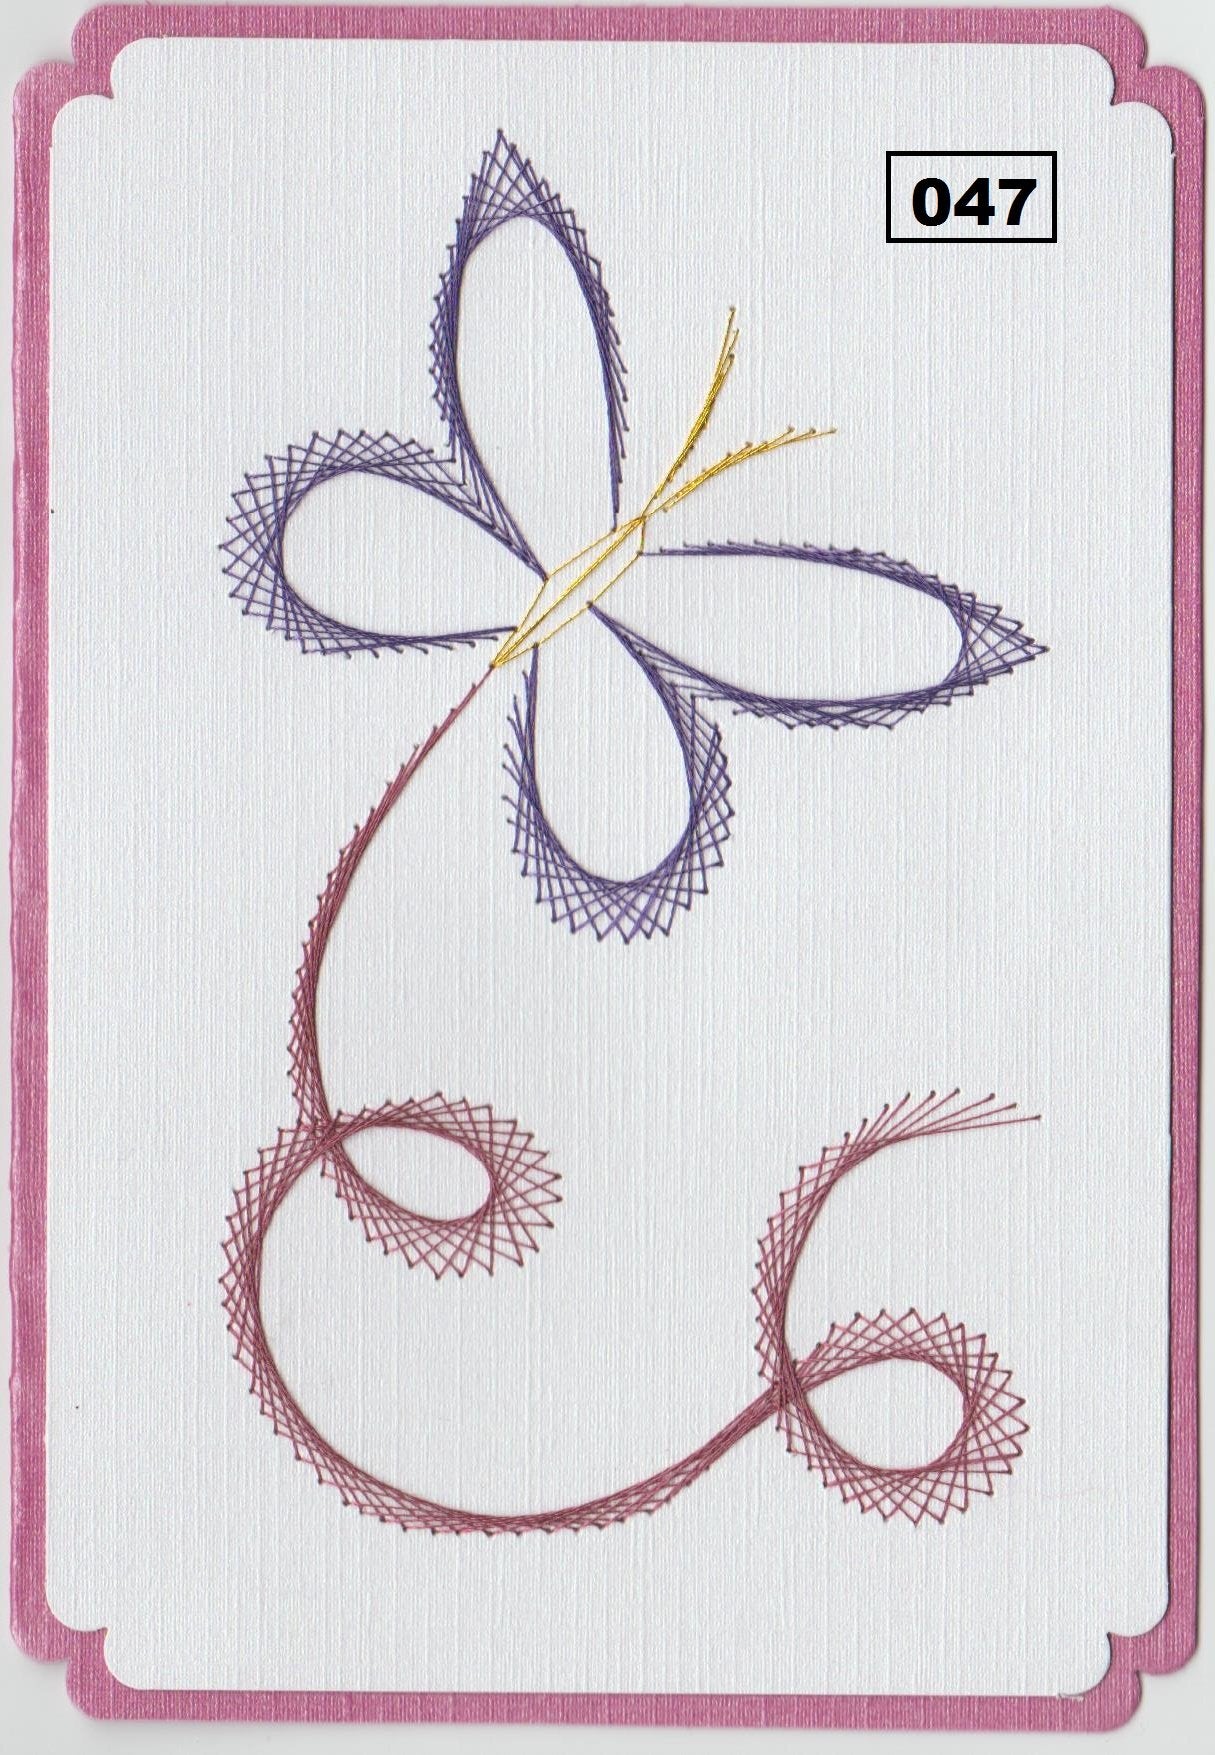 Laura's Design Digital Embroidery Pattern - Floating Butterfly